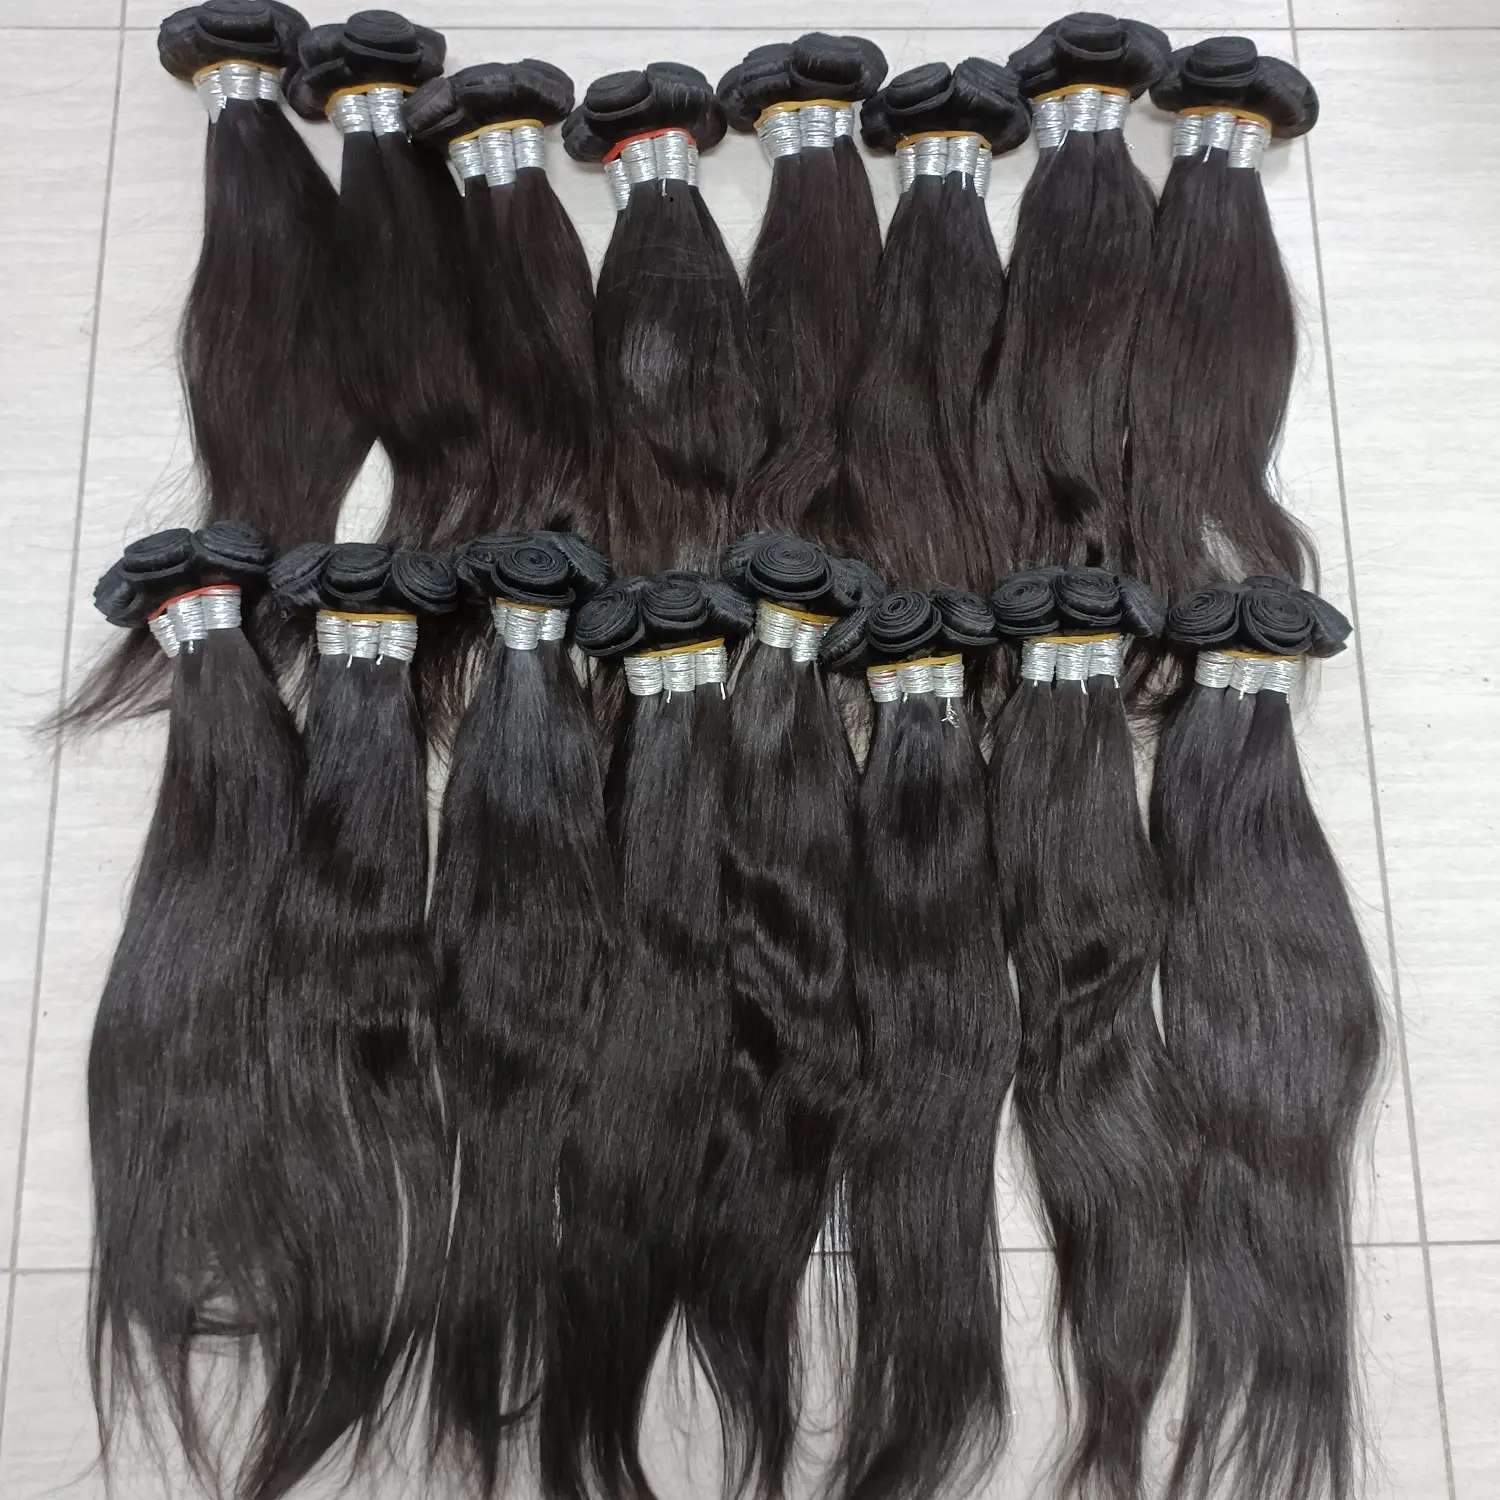 Letsfly Free Shipping Cheap 7A Silky Straight Remy Hair Bundles 20PCS 1KG Long Inches Extensions Brazilian Human Hair Weave